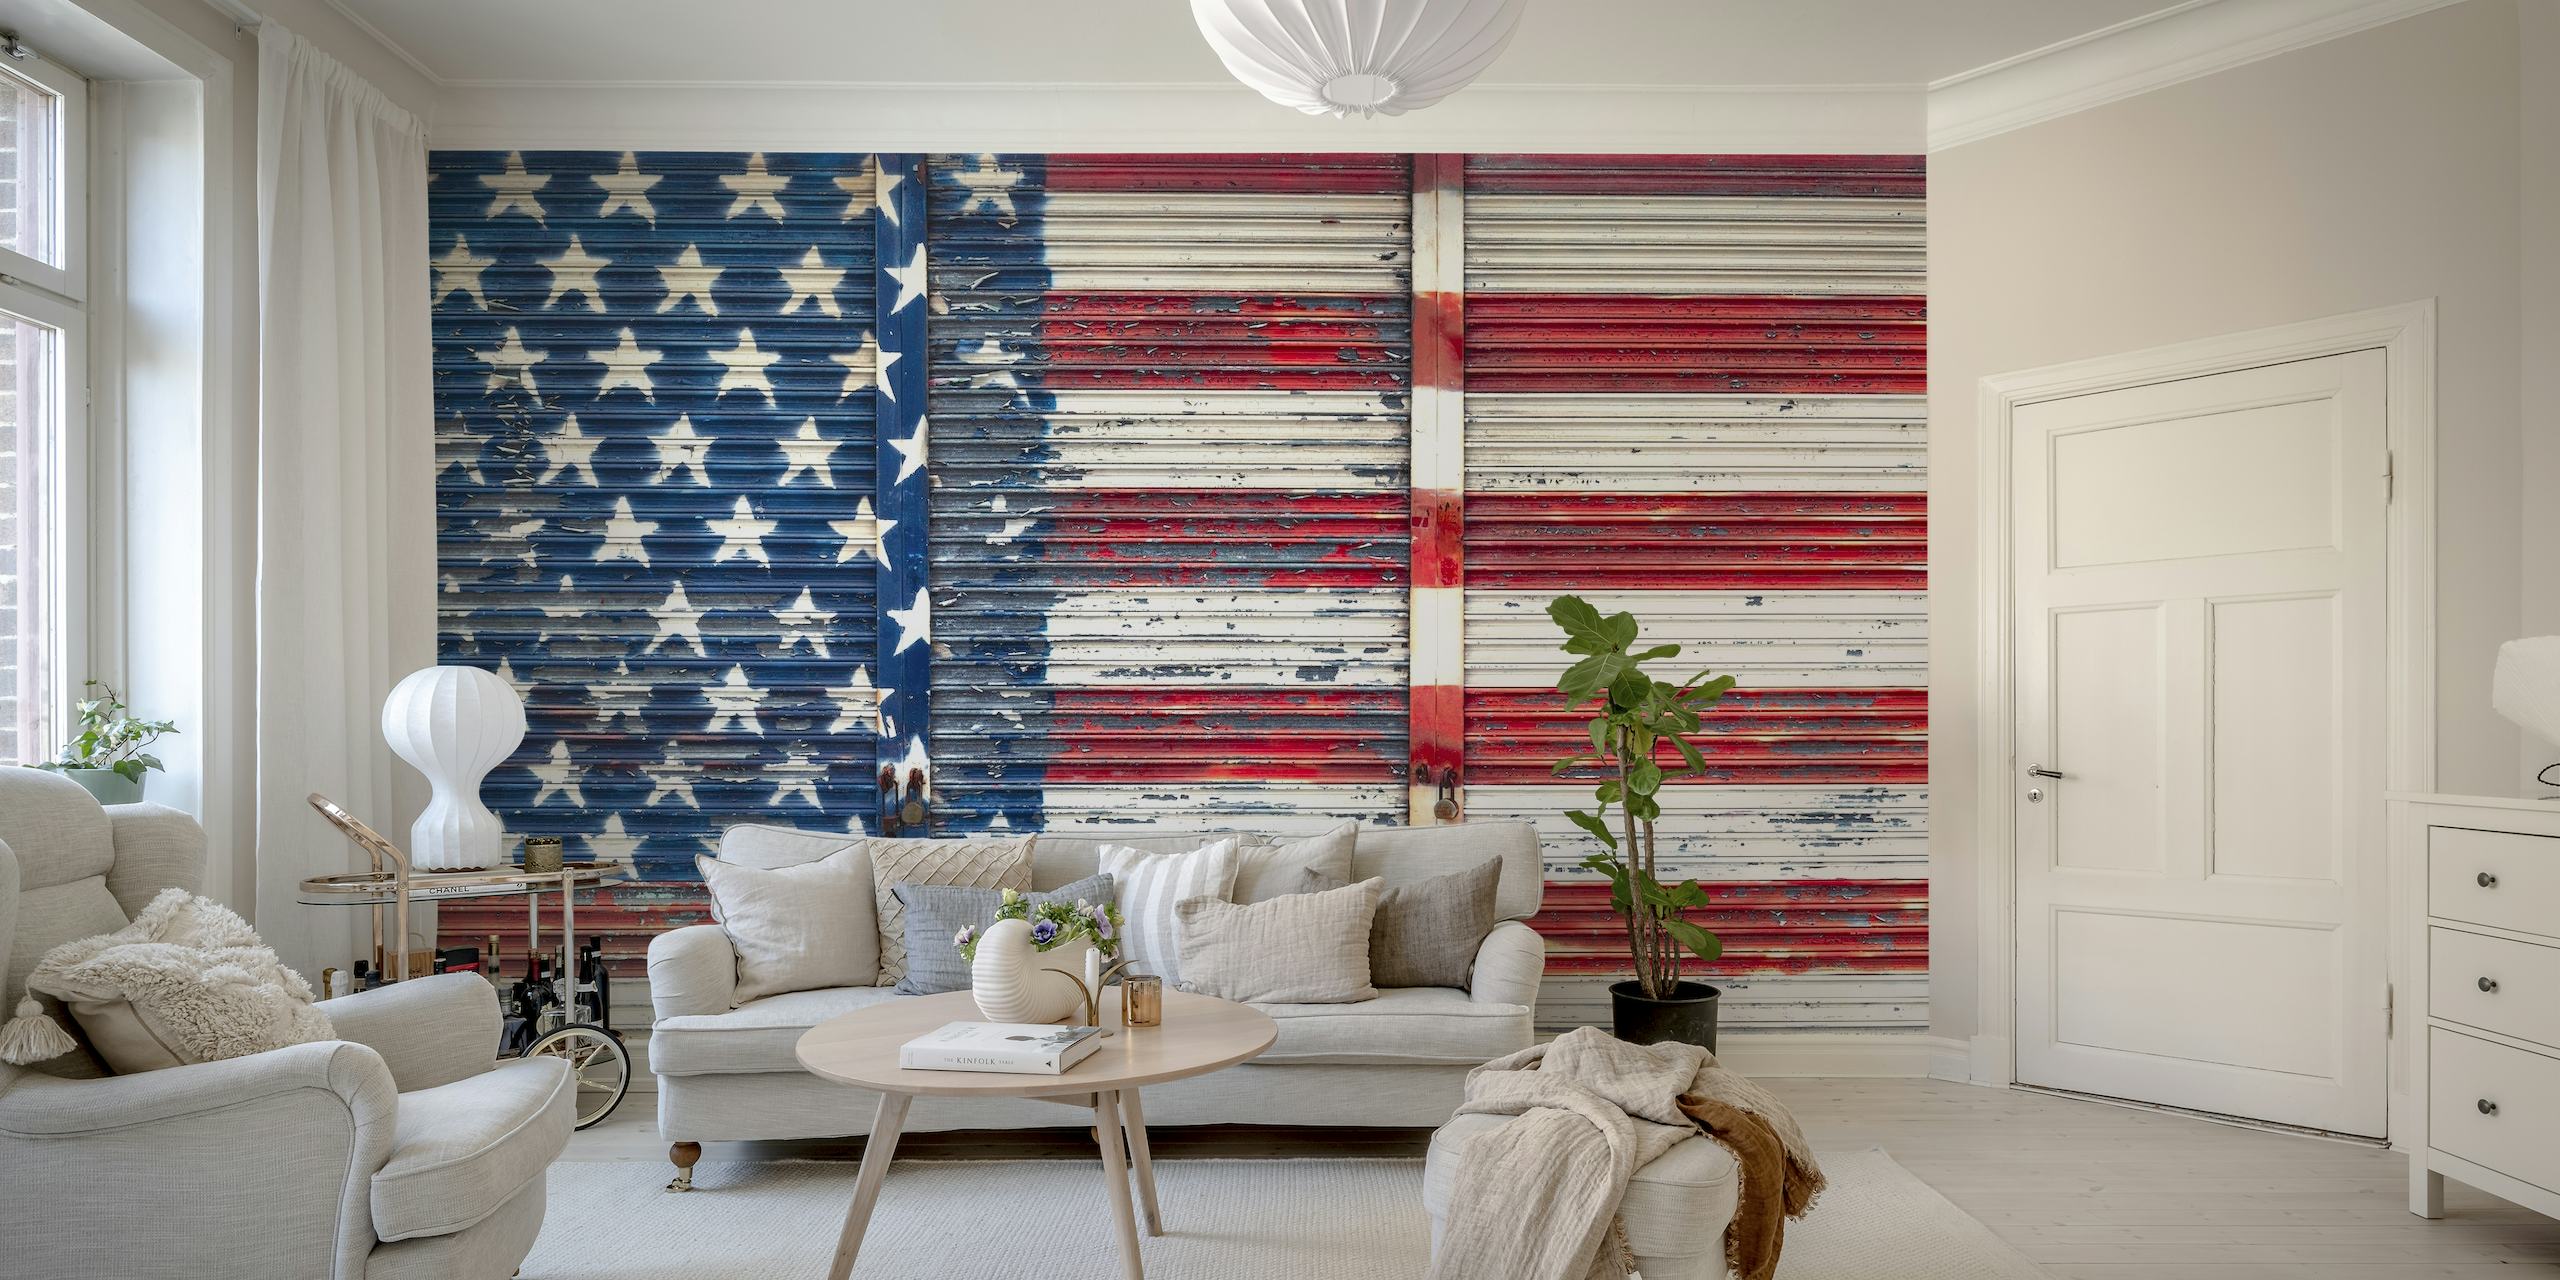 Stars and Stripes behang